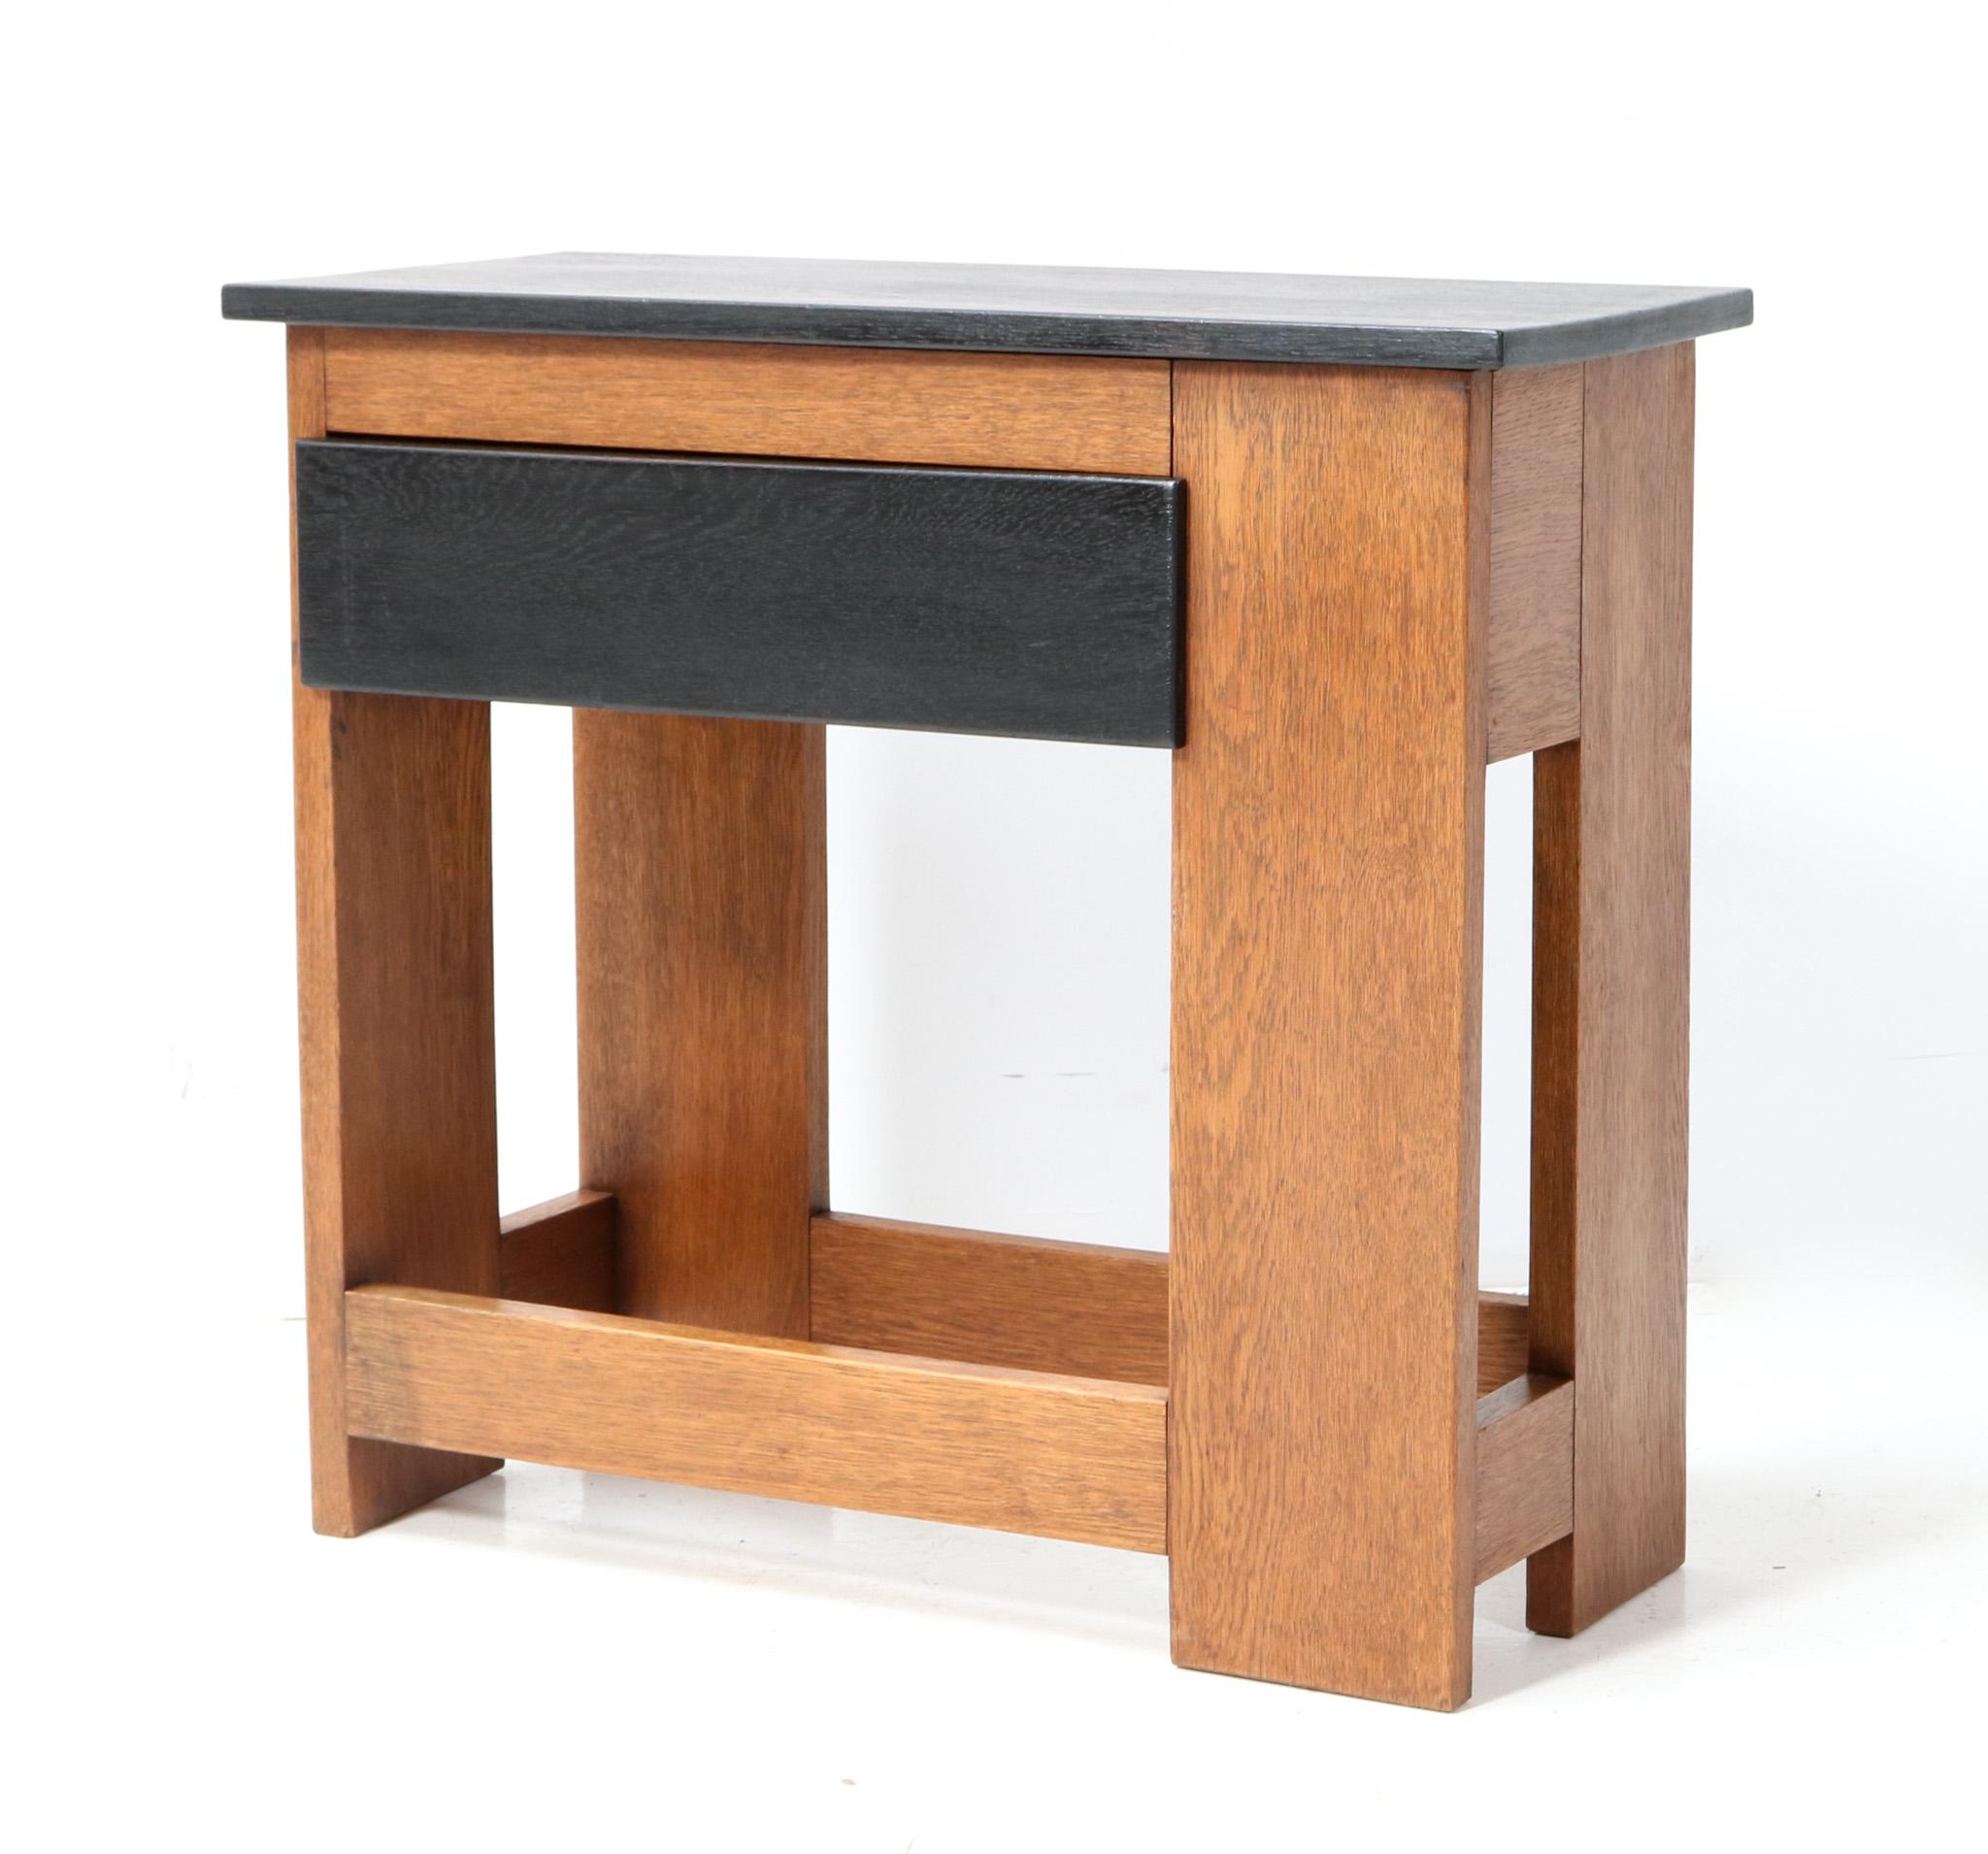 Early 20th Century  Art Deco Modernist Oak Cabinet or Side Table by Cor Alons, 1920s For Sale